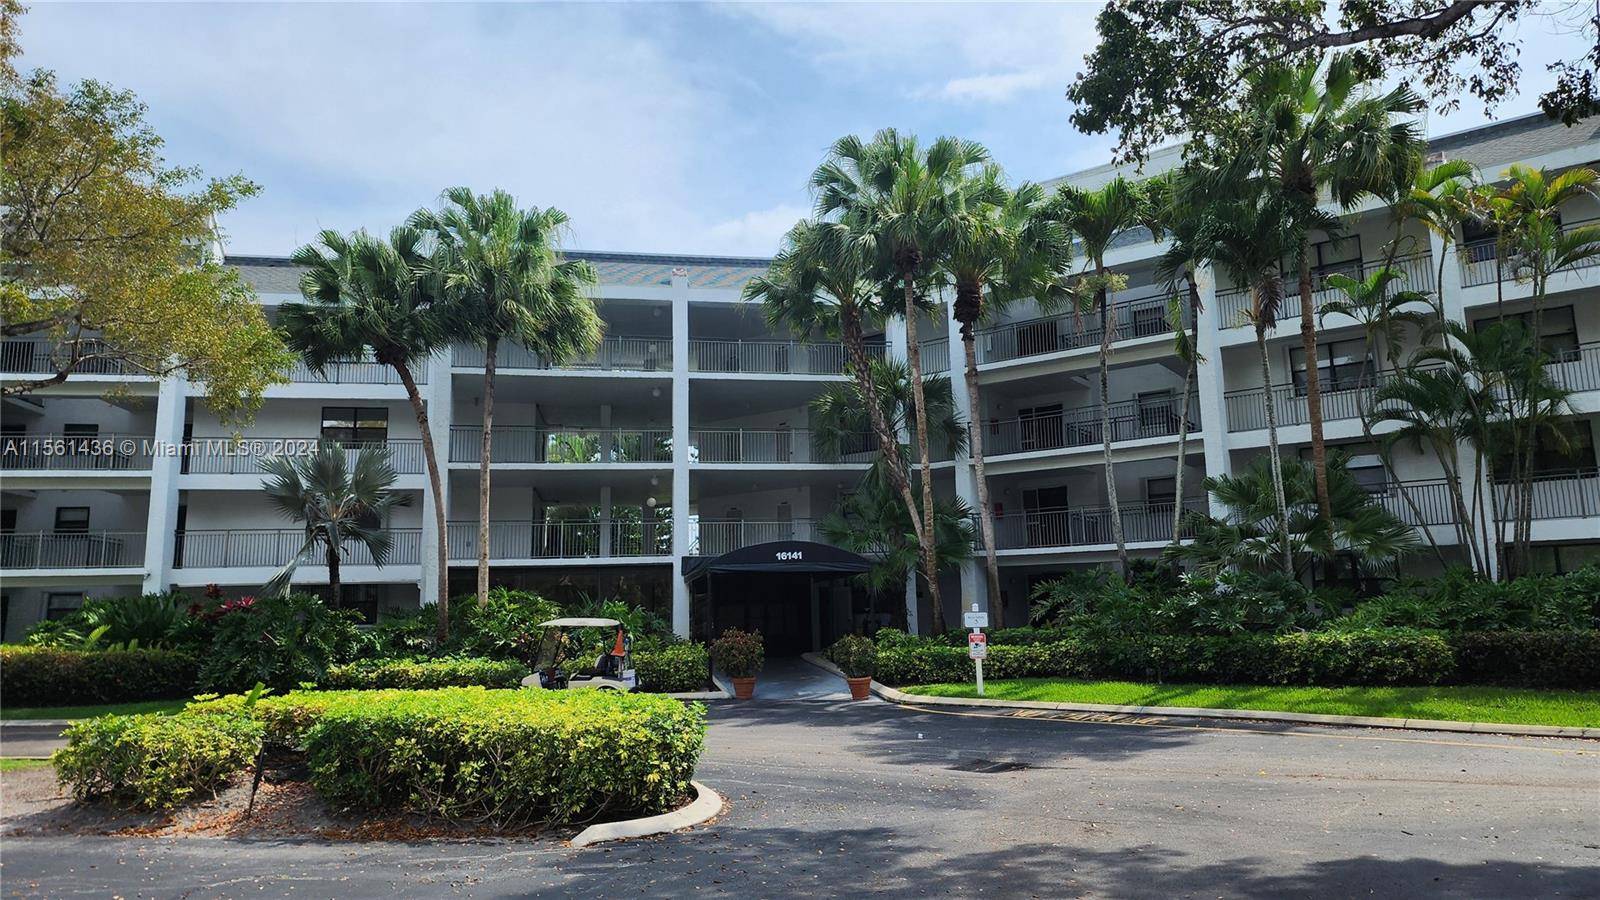 Enjoy the amazing sunsets and golf views from the condo nestled in the heart of Weston offers a blend of comfort and luxury.